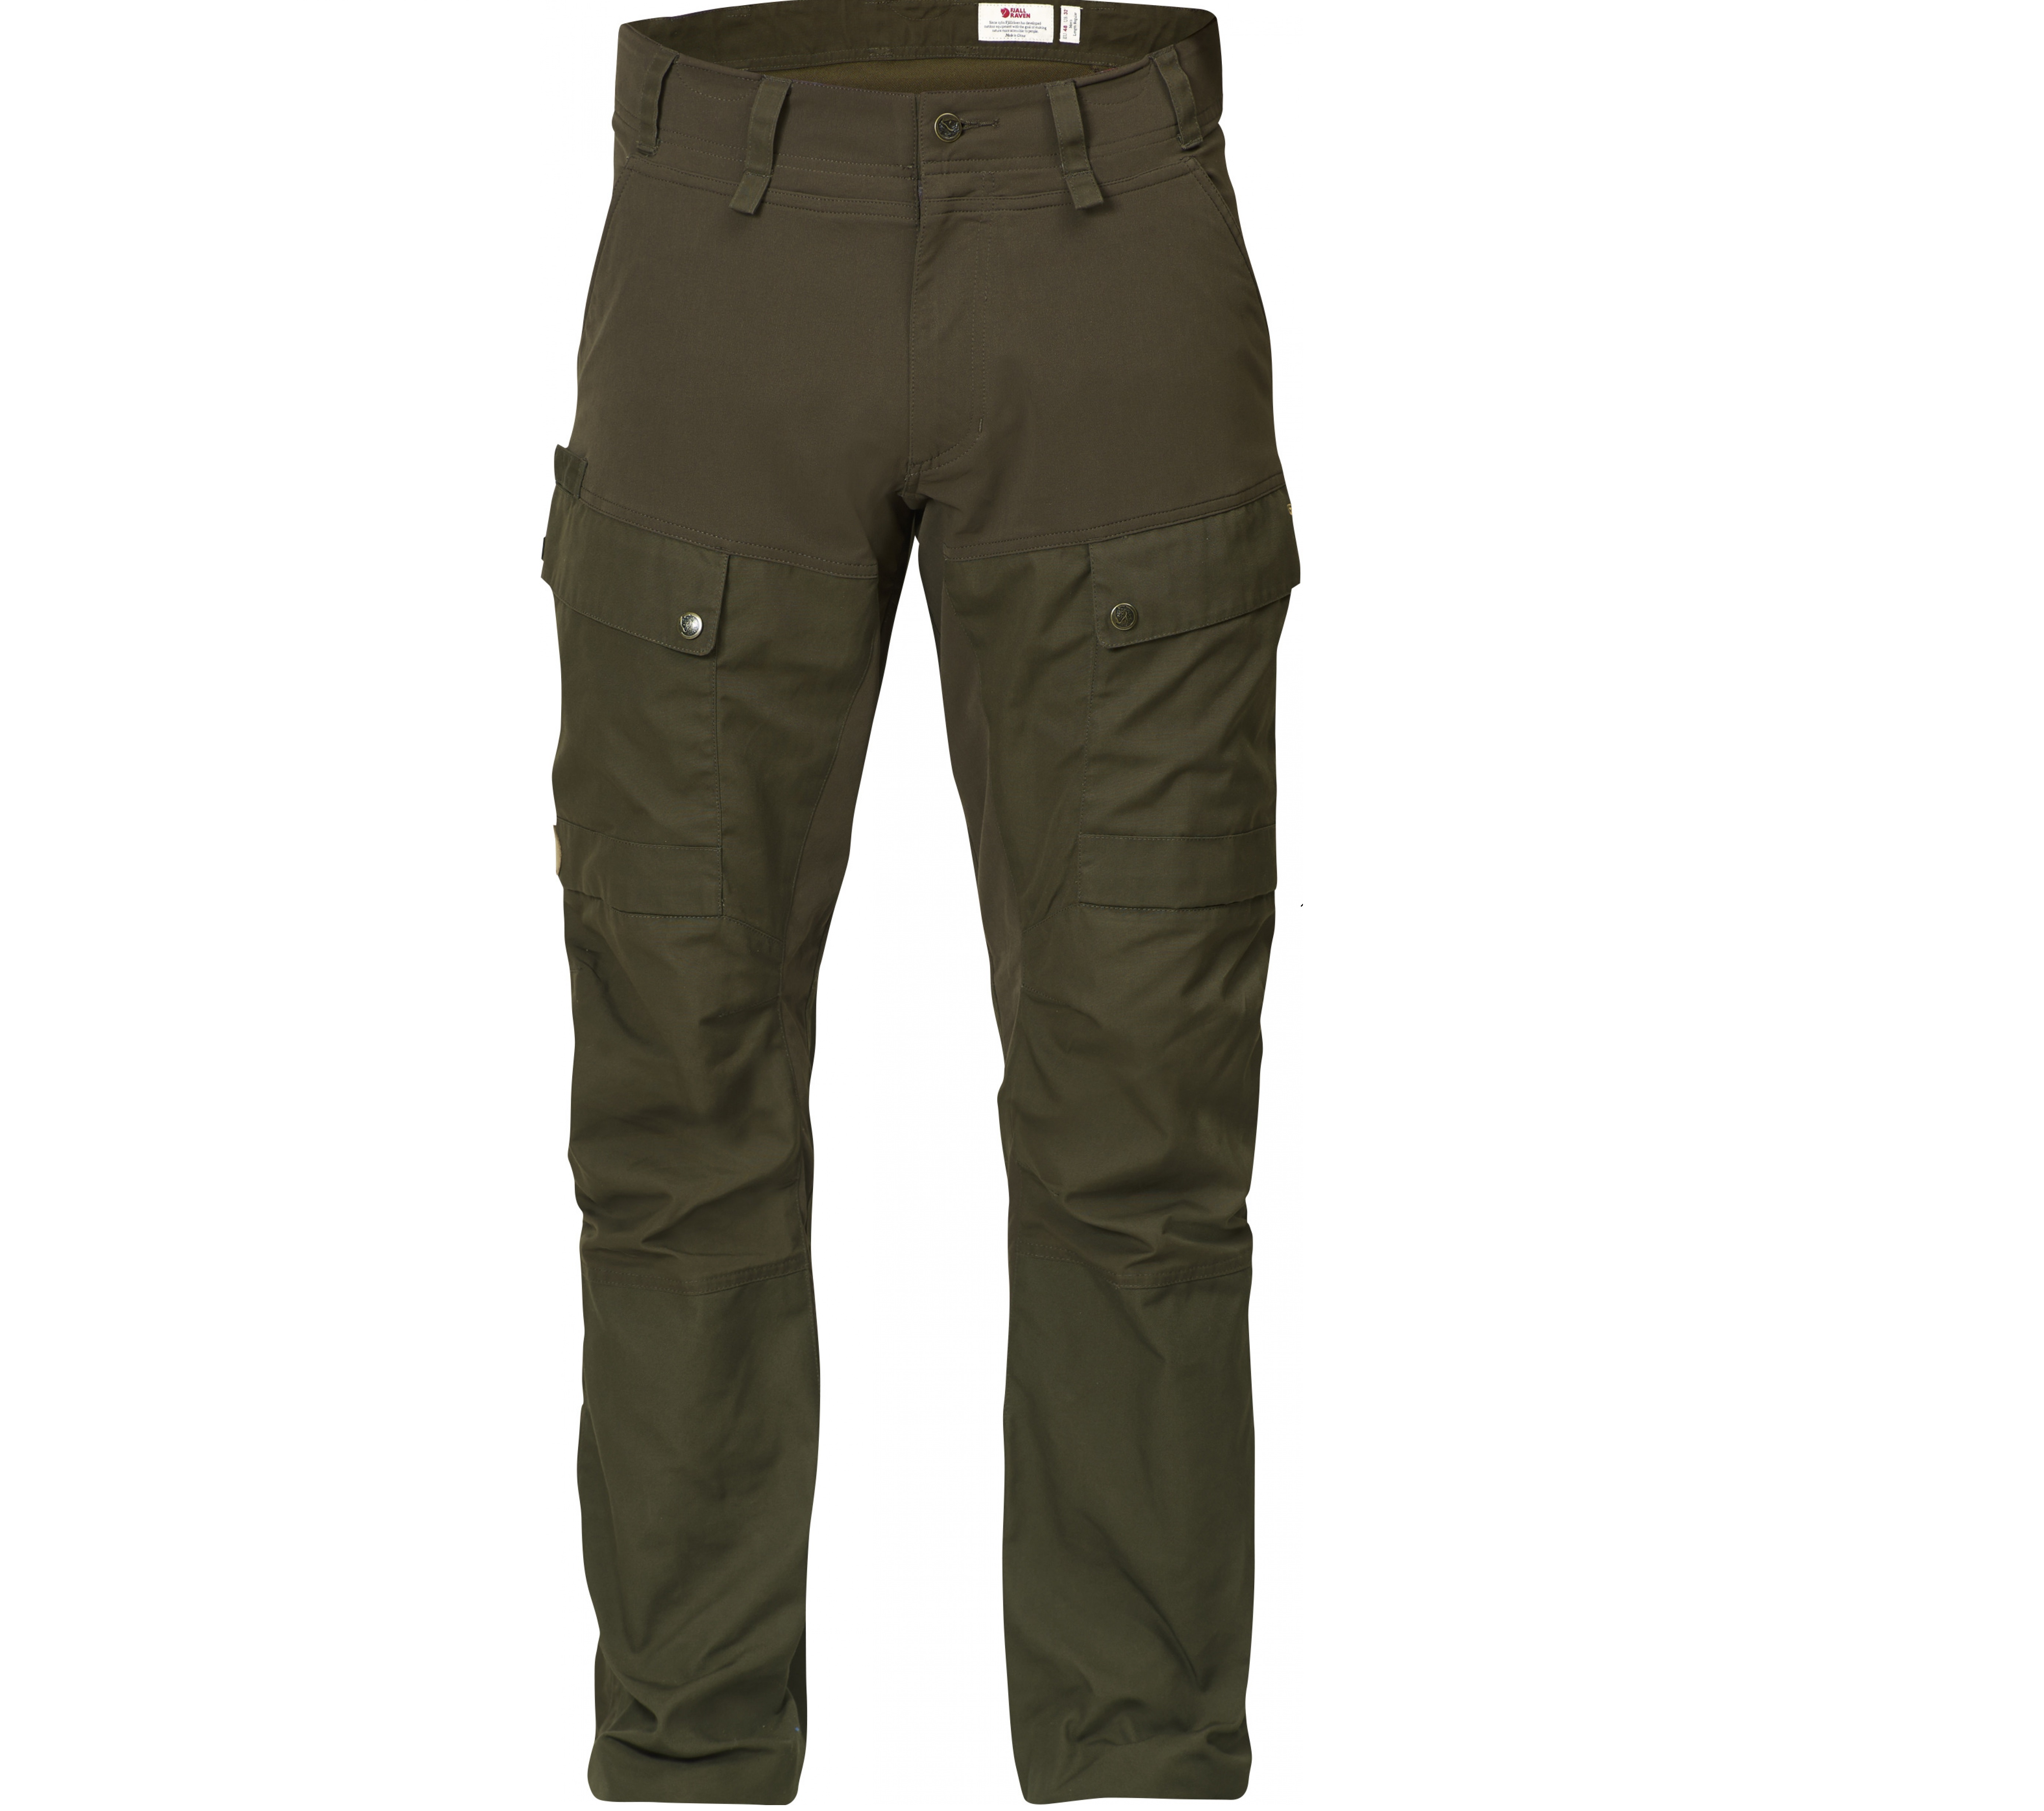 https://www.nepo.sk/tmp/import/products//fjall_raven_lappland_hybrid_trousers_dark_olive.jpg | Nepo